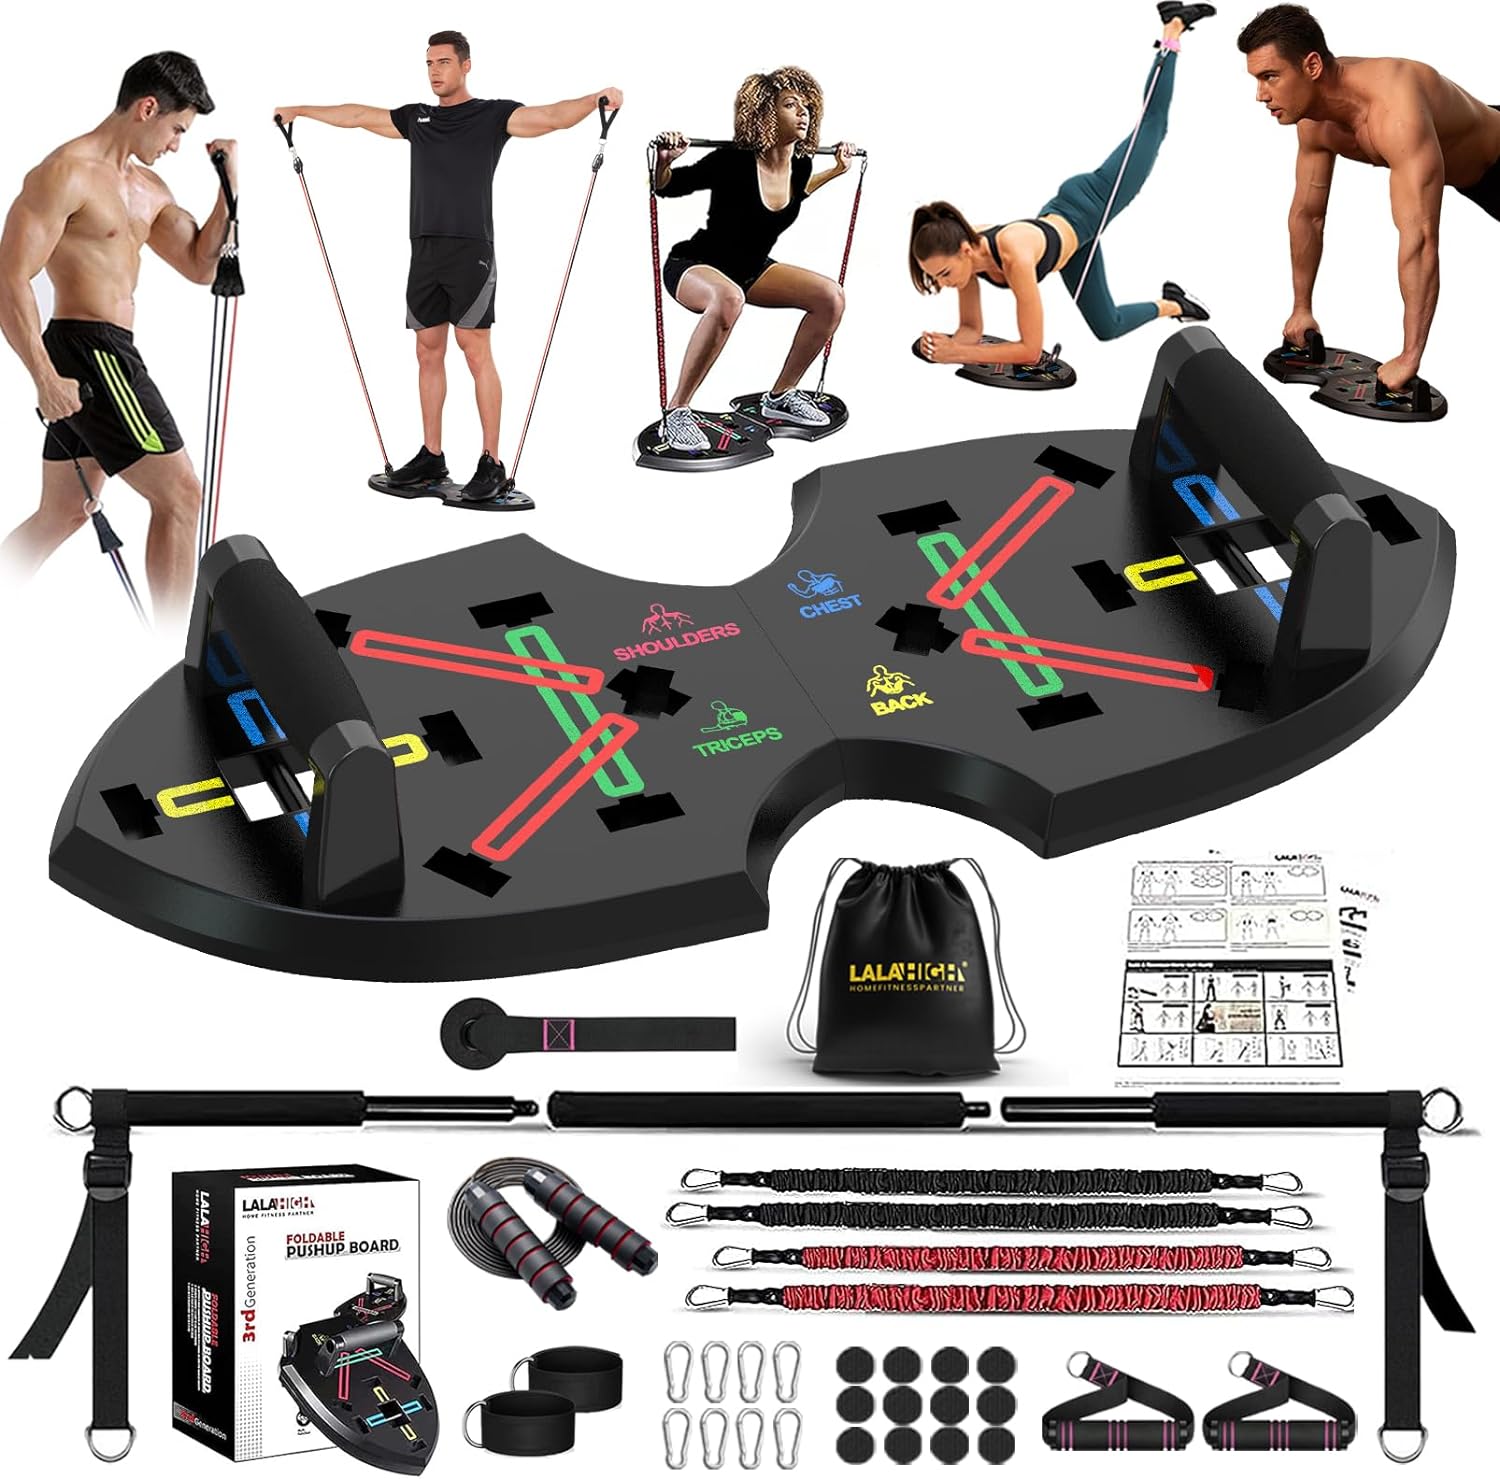 Upgraded Push Up Board: Multi-Functional Push Up Bar with Resistance Bands, Portable Home Gym, Strength Training Equipment, Push Up Handles for Perfect Pushups, Home Fitness for Men and Women